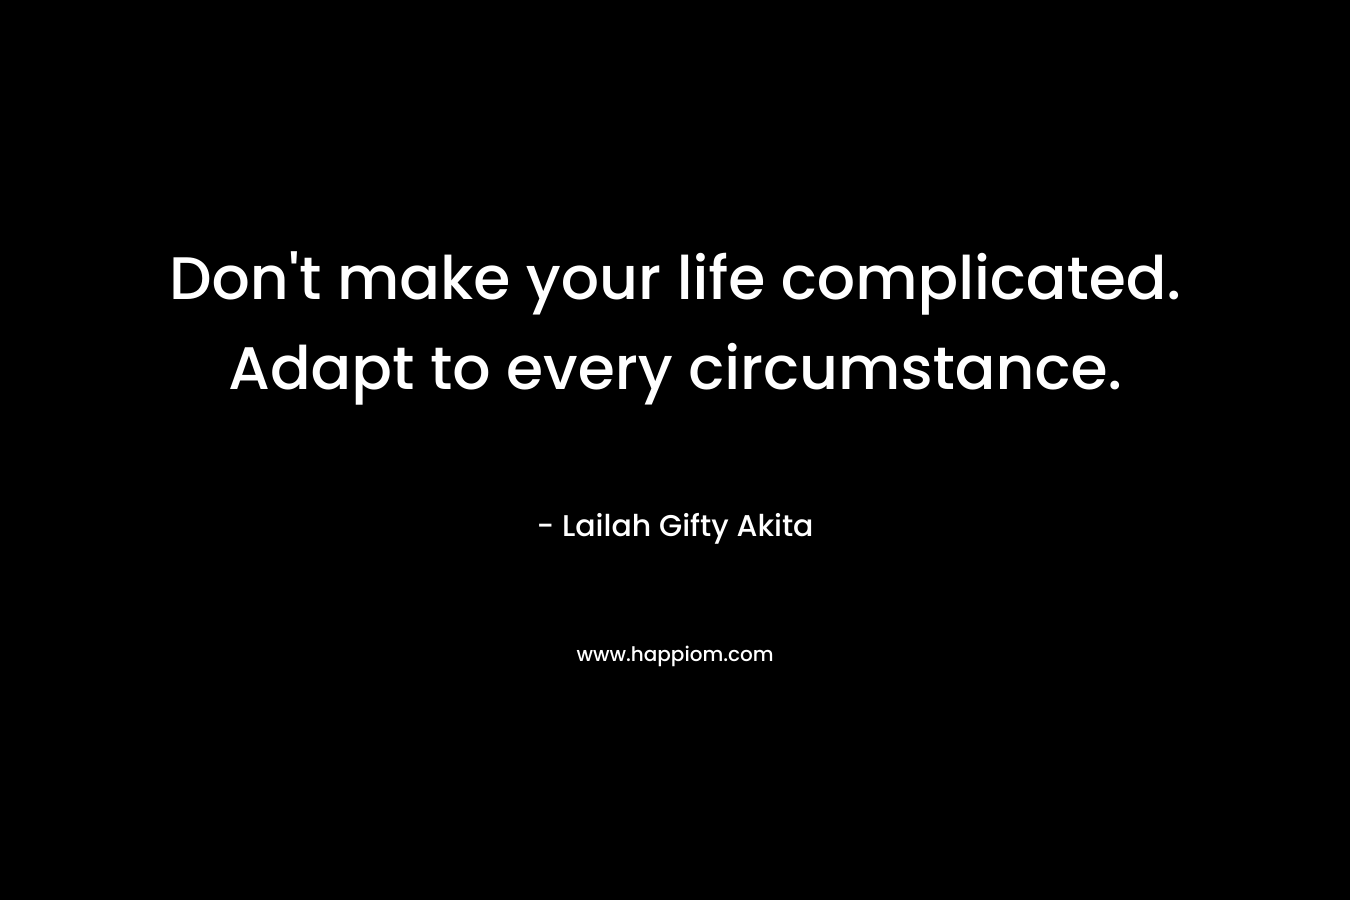 Don't make your life complicated. Adapt to every circumstance.